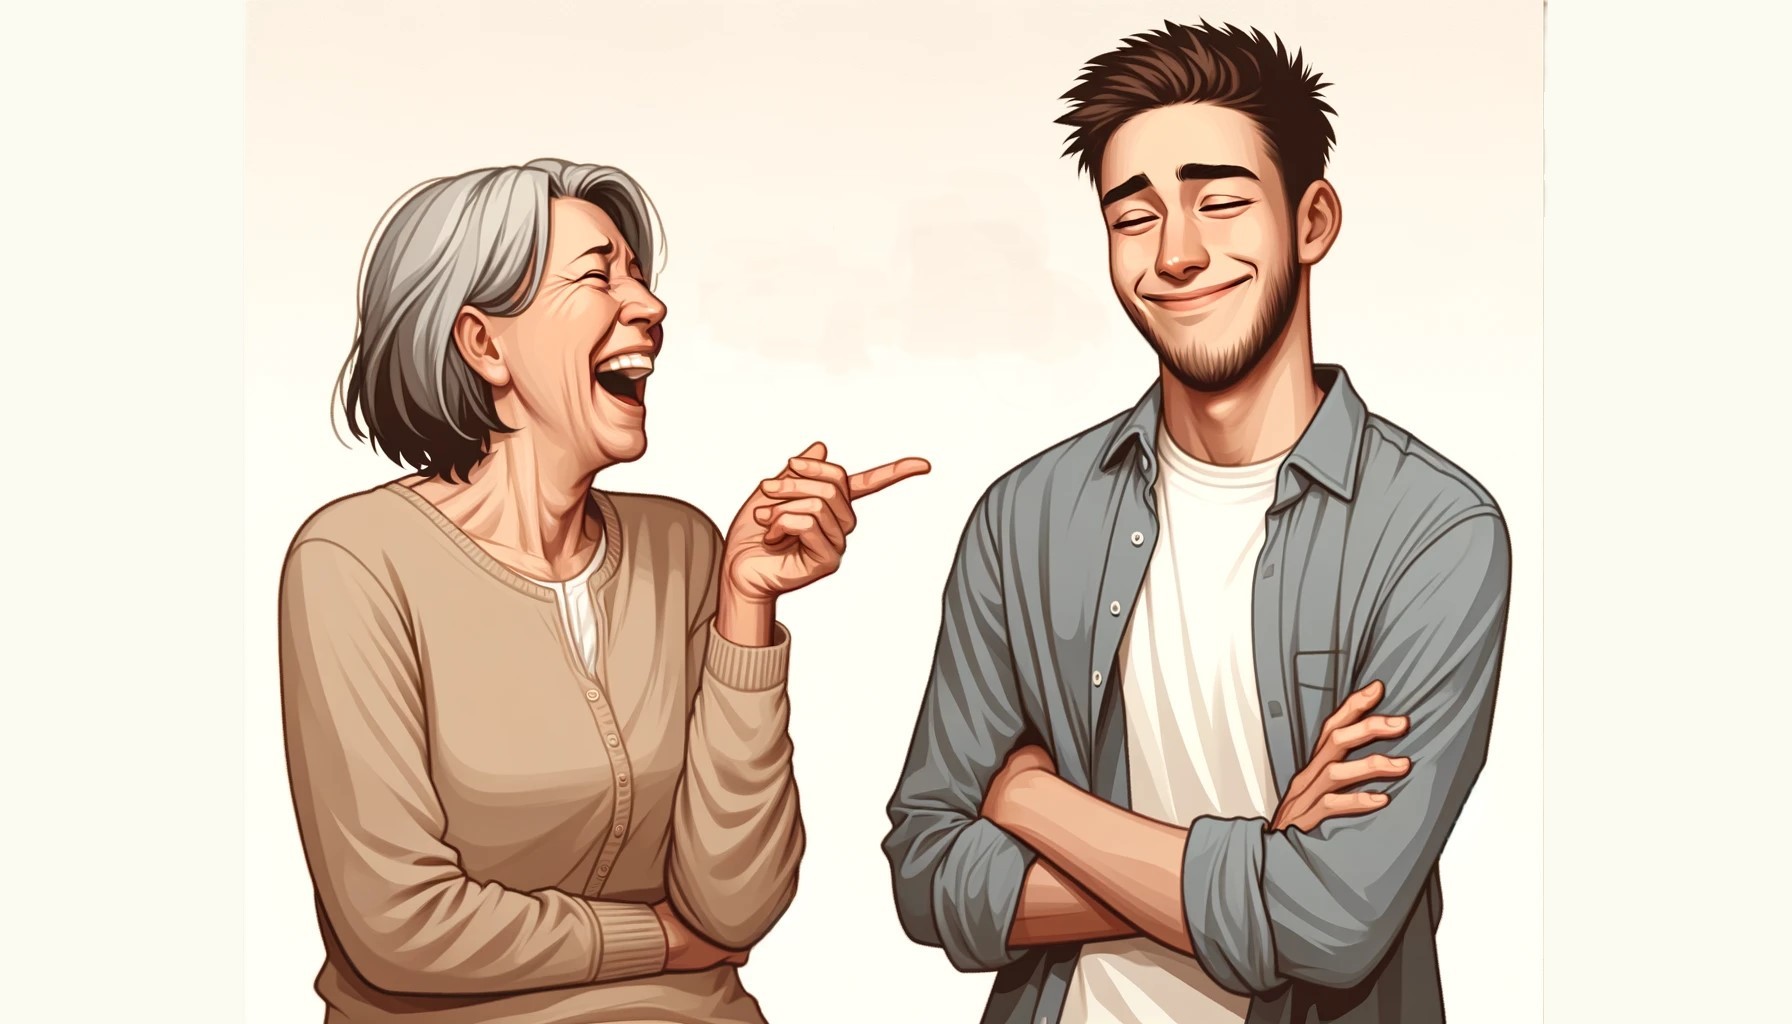 mother and son making jokes